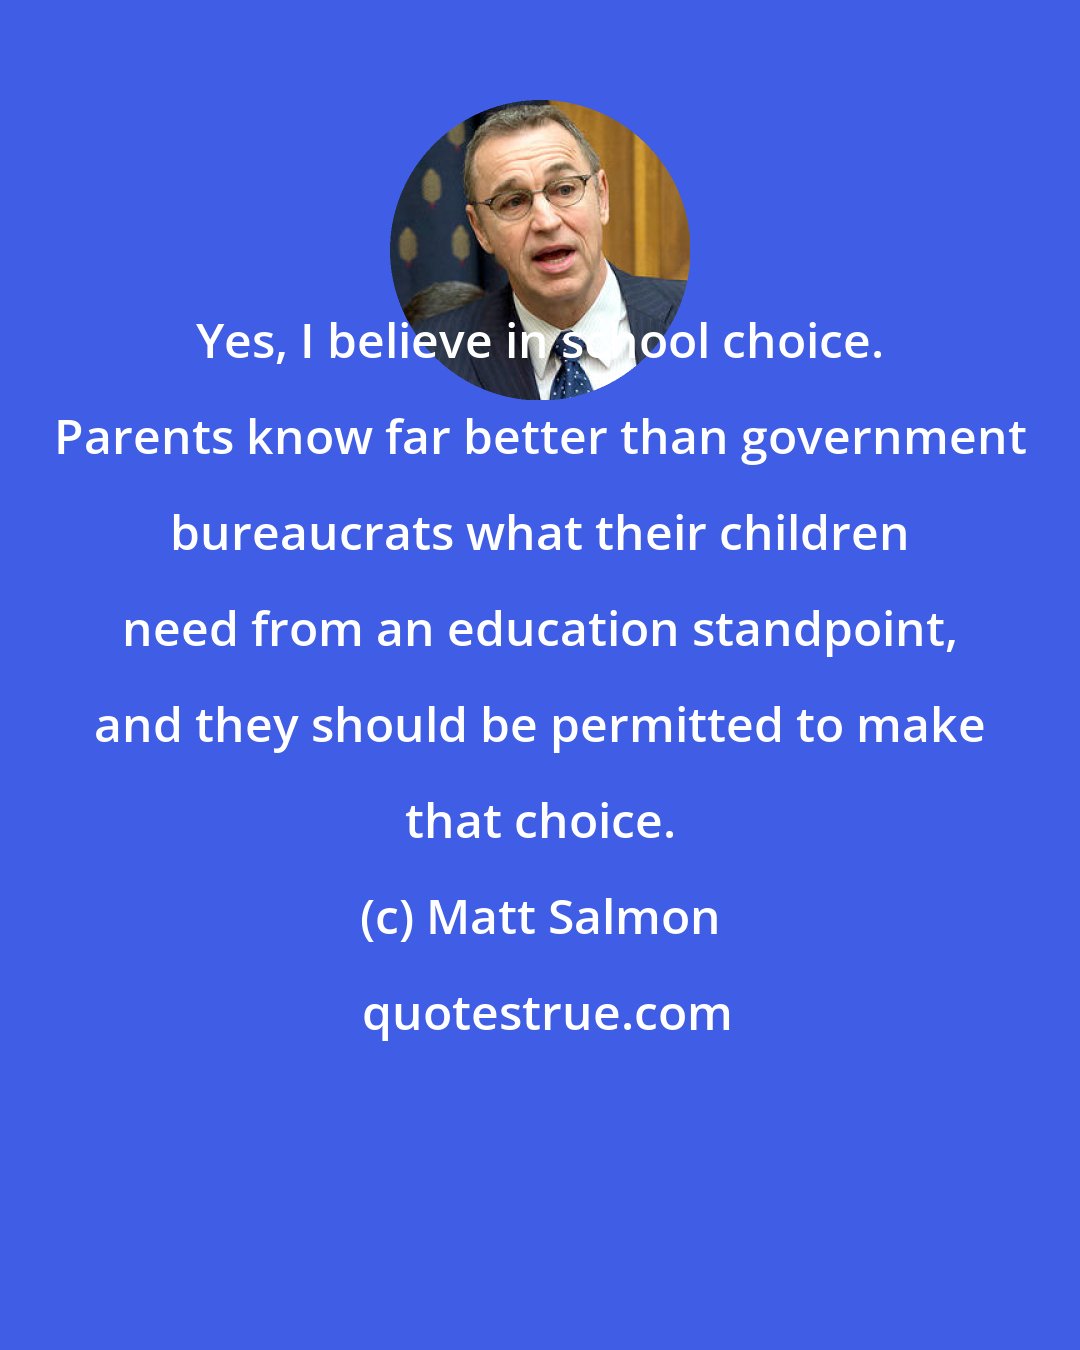 Matt Salmon: Yes, I believe in school choice. Parents know far better than government bureaucrats what their children need from an education standpoint, and they should be permitted to make that choice.